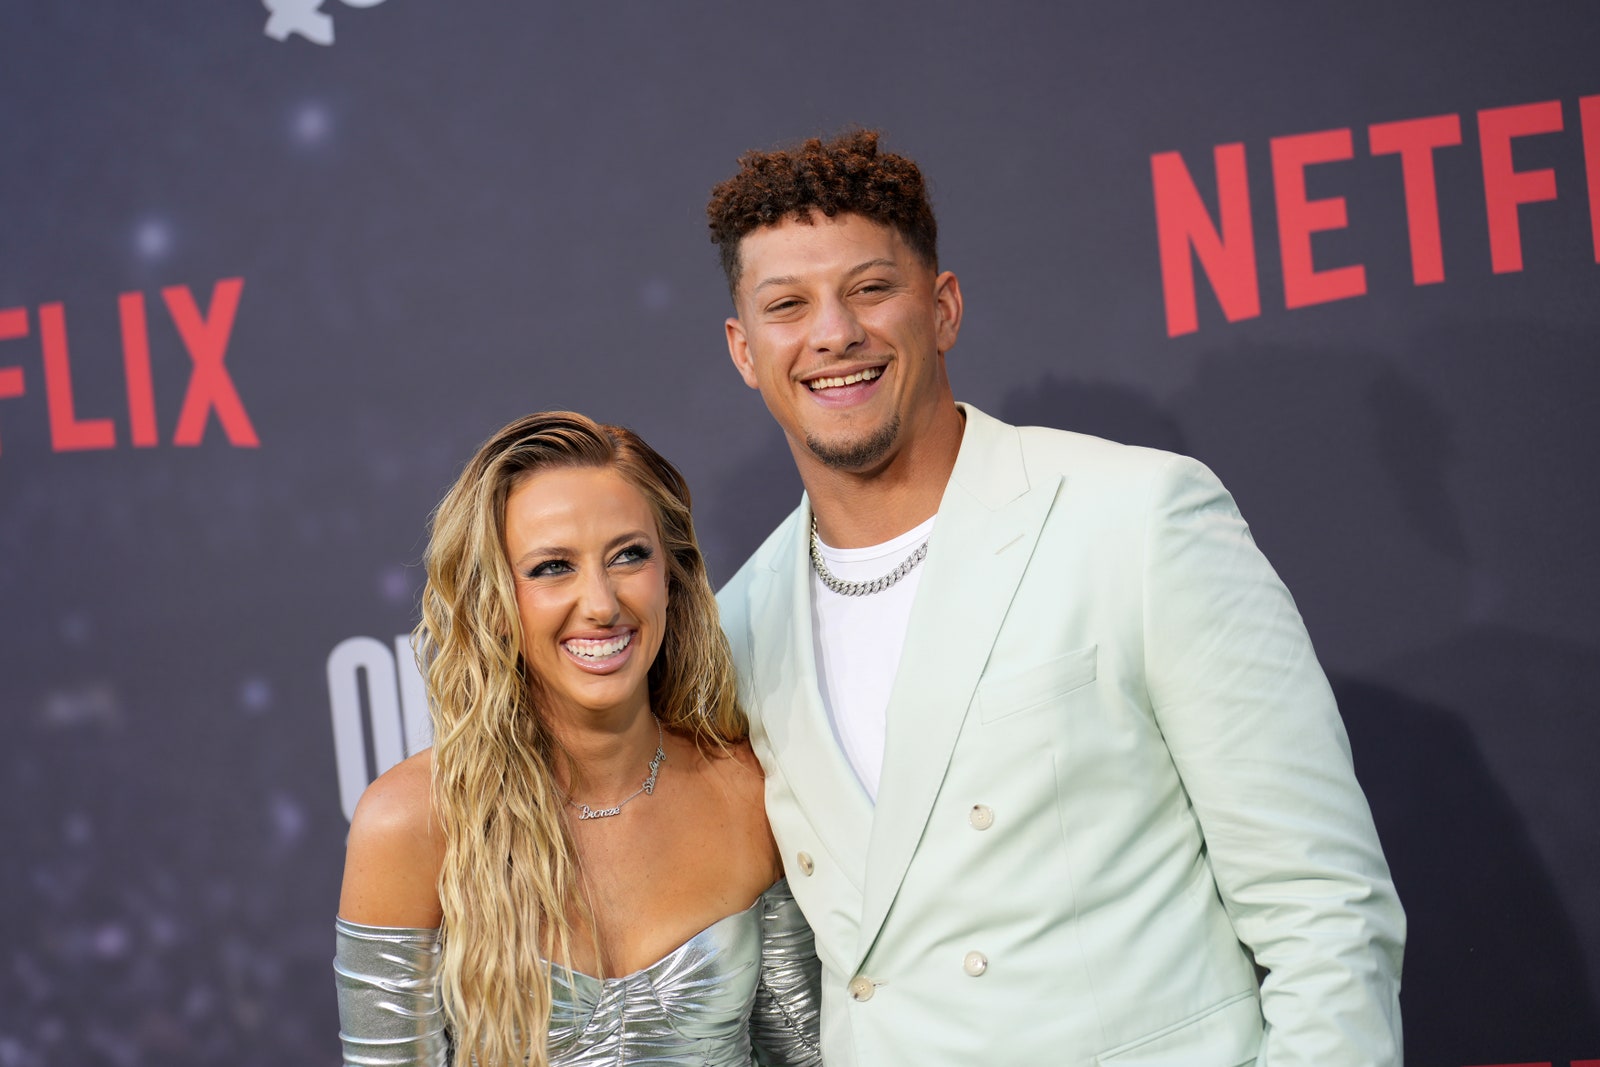 Patrick Mahomes and his wife Brittany Mahomes share two children daughter Sterling 2 and son Bronze 9 months.